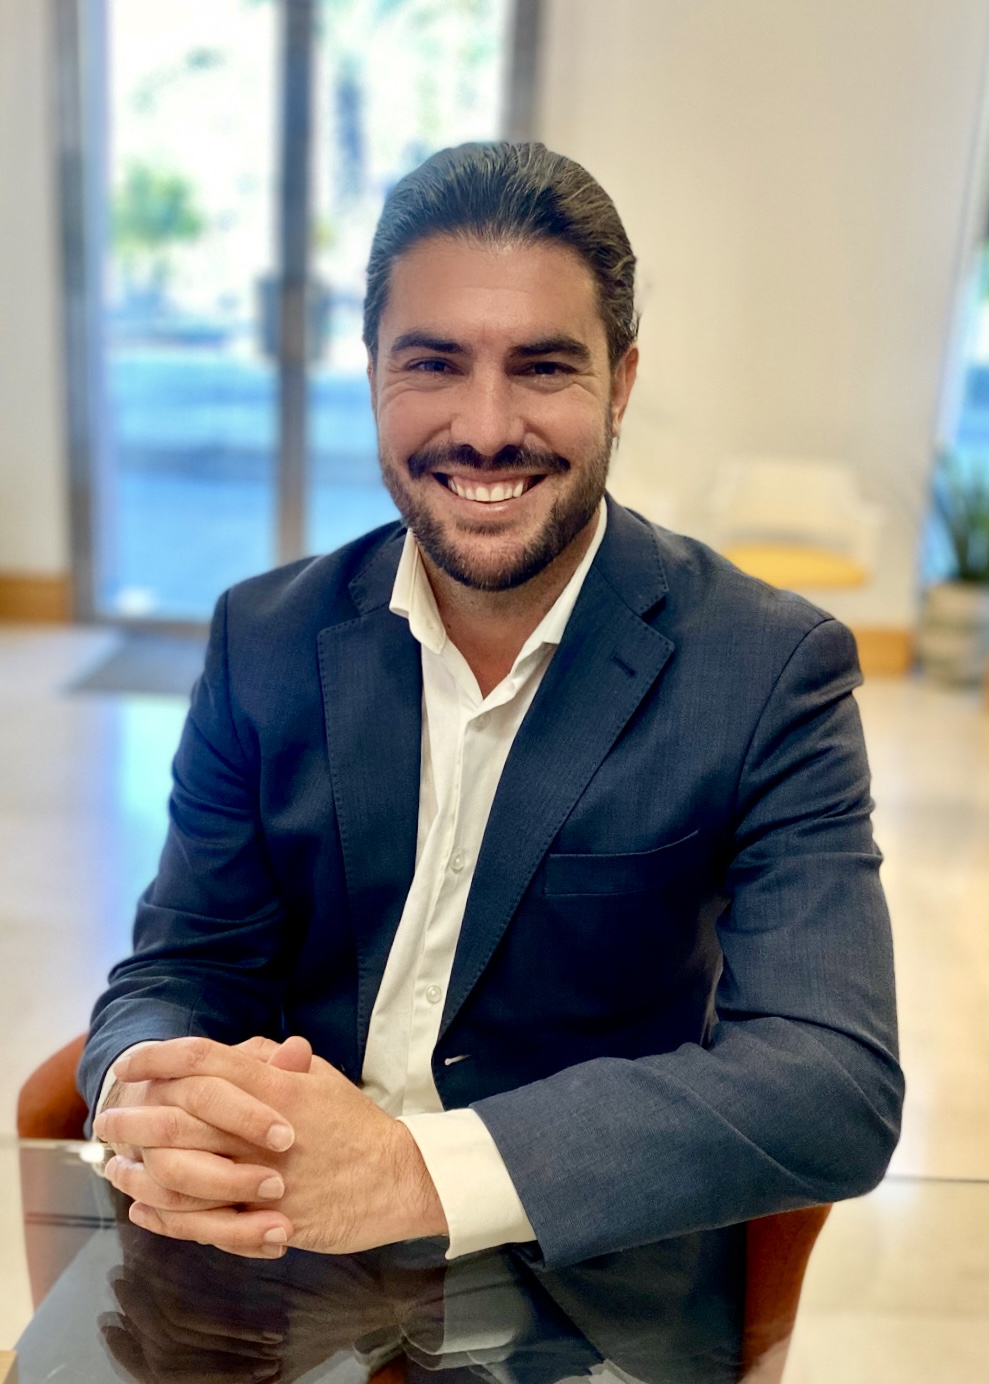 Juanfe Luque, Real-Estate Consultant Seville Sotheby's International Realty